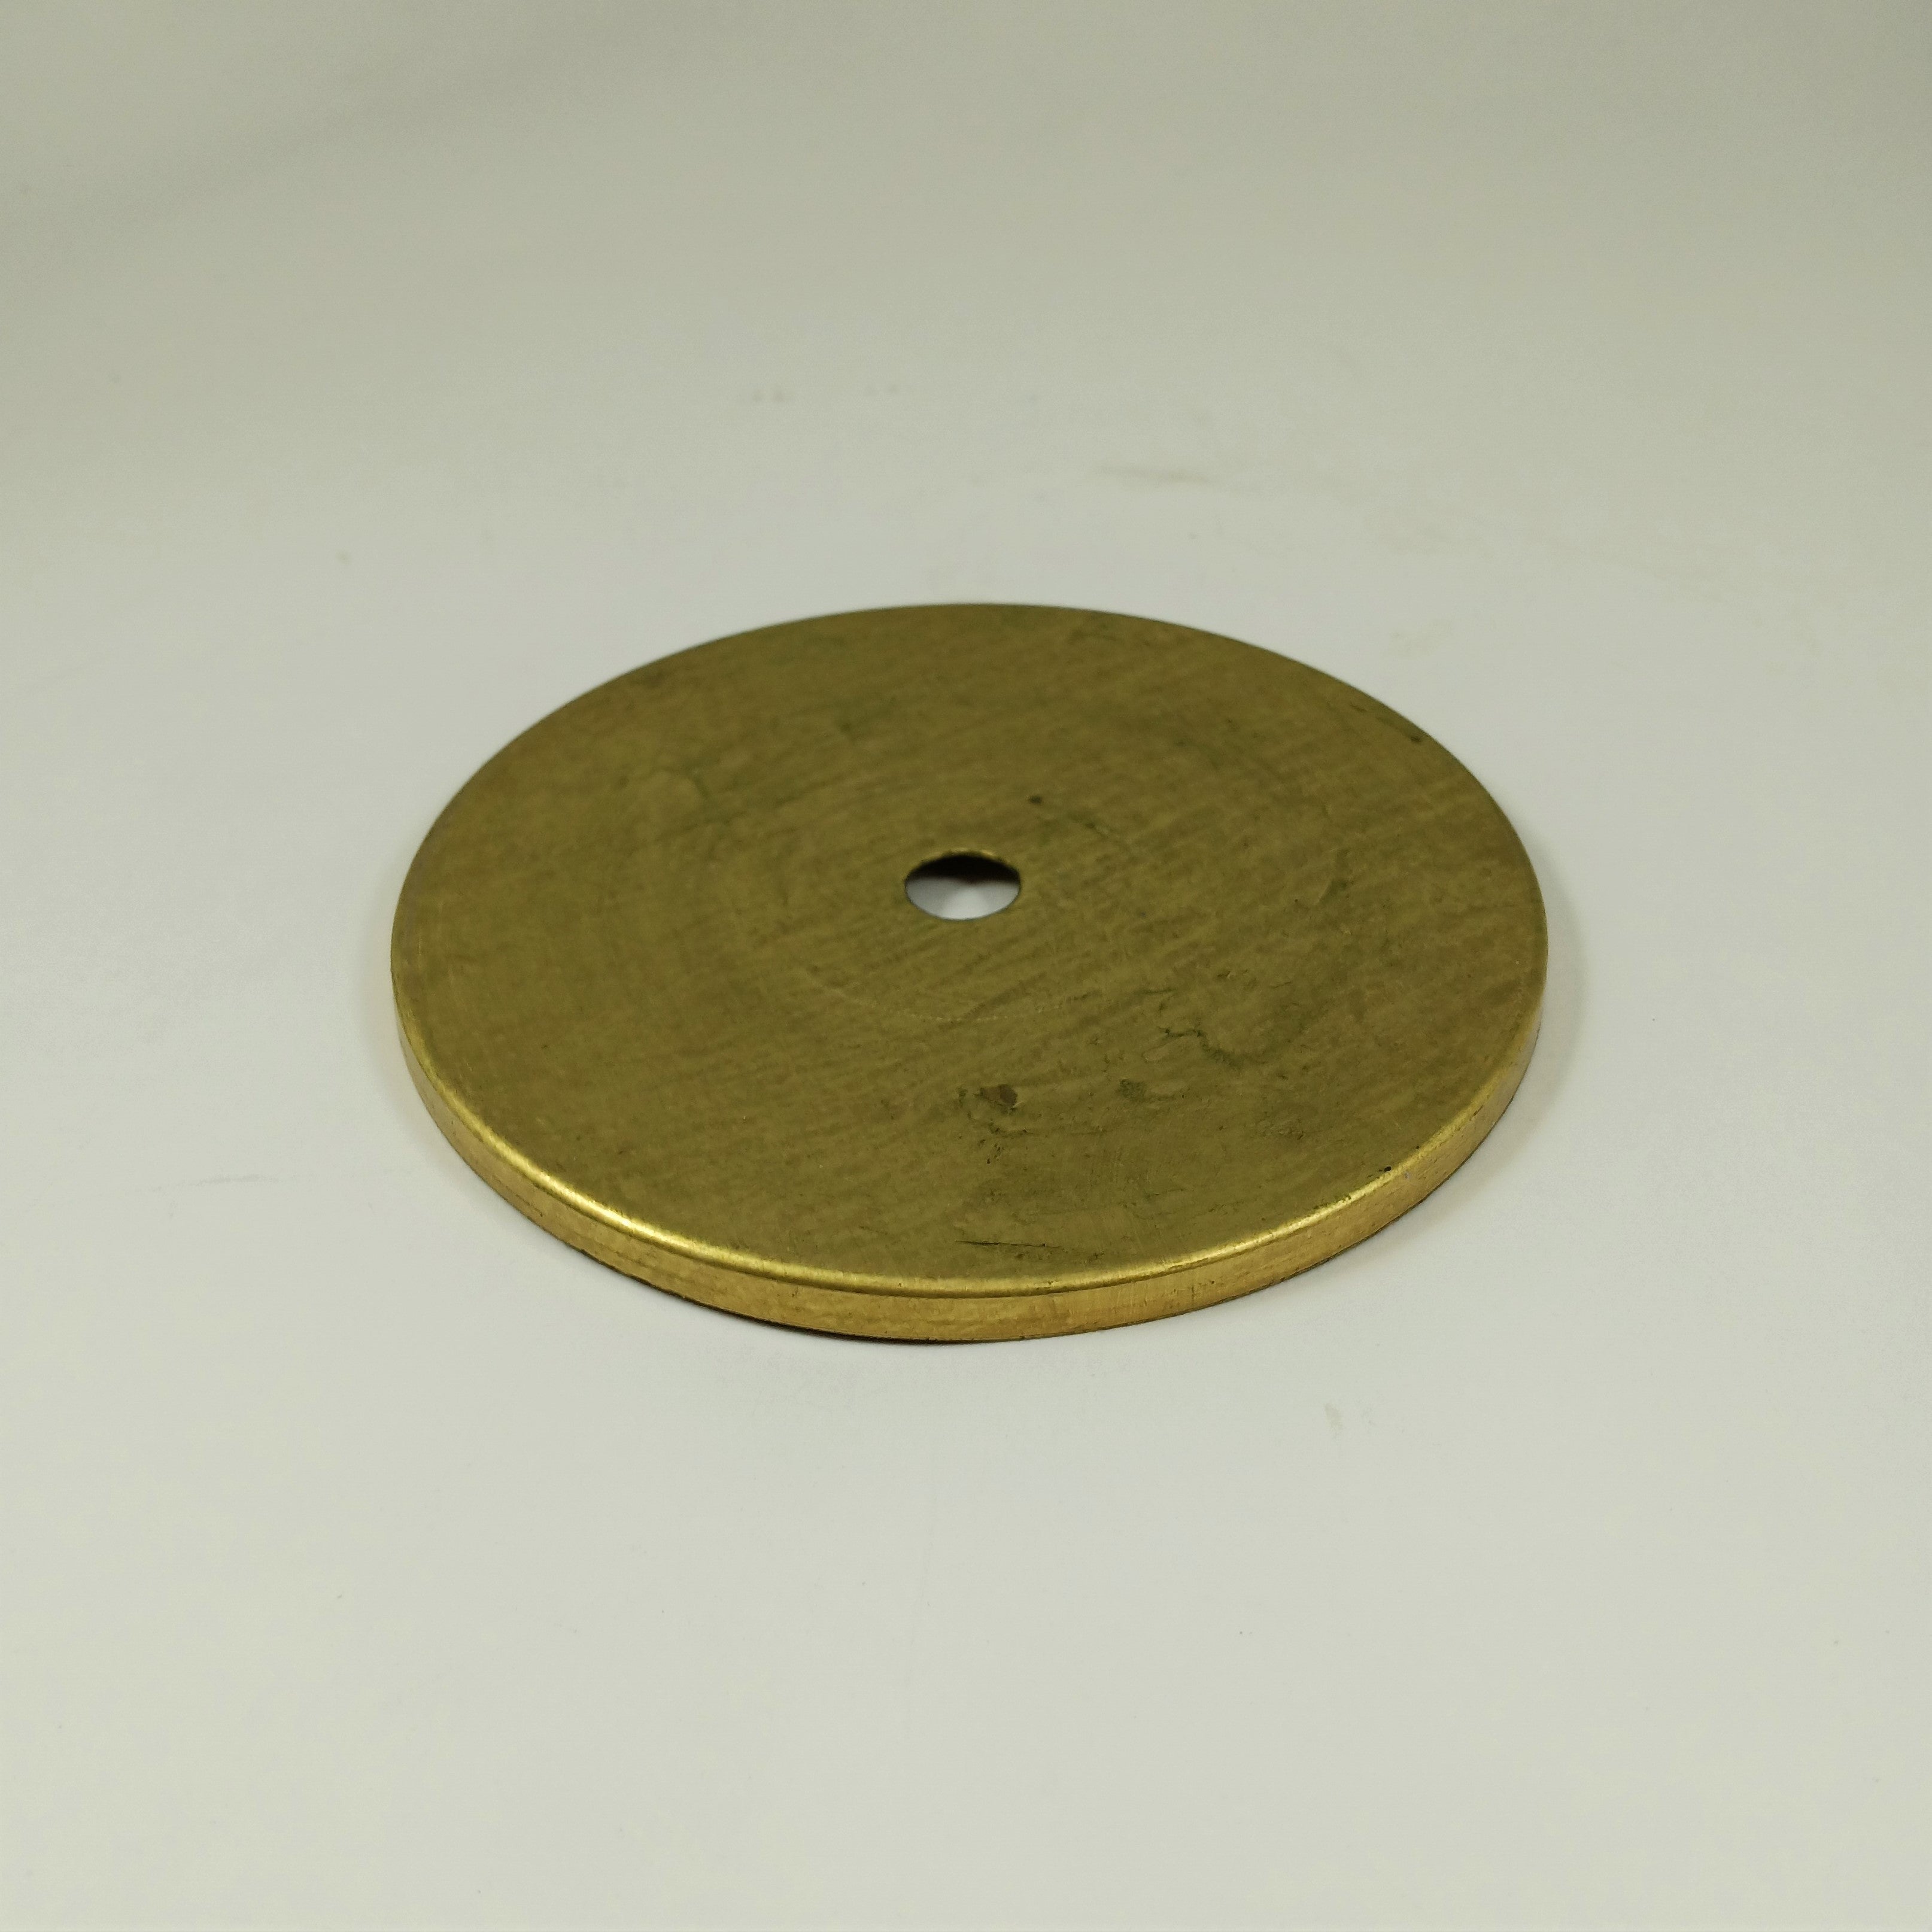 4" Round Flat Brass Plates - Unfinished Brass - Check Plate with